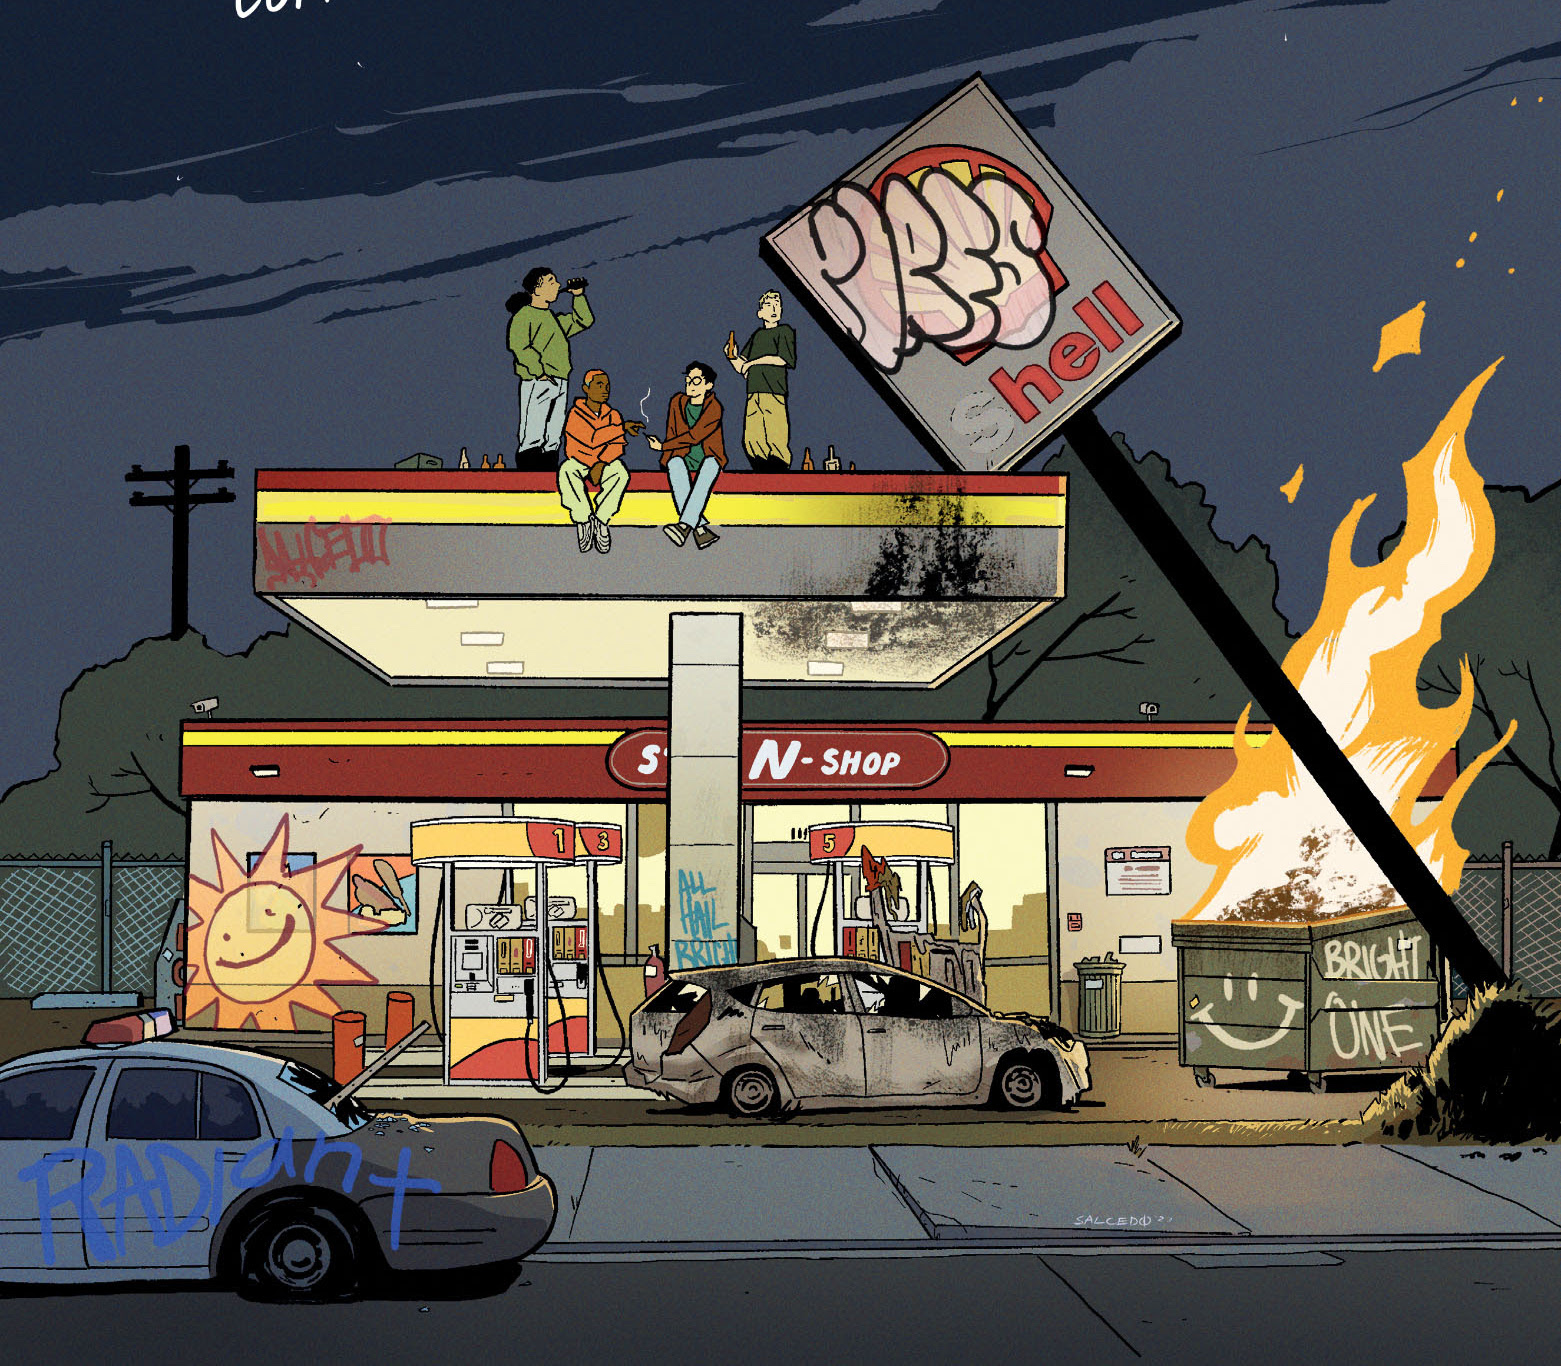 Curt Pires and Jacoby Salcedo team for 'It’s Only Teenage Wasteland' #1 December 7